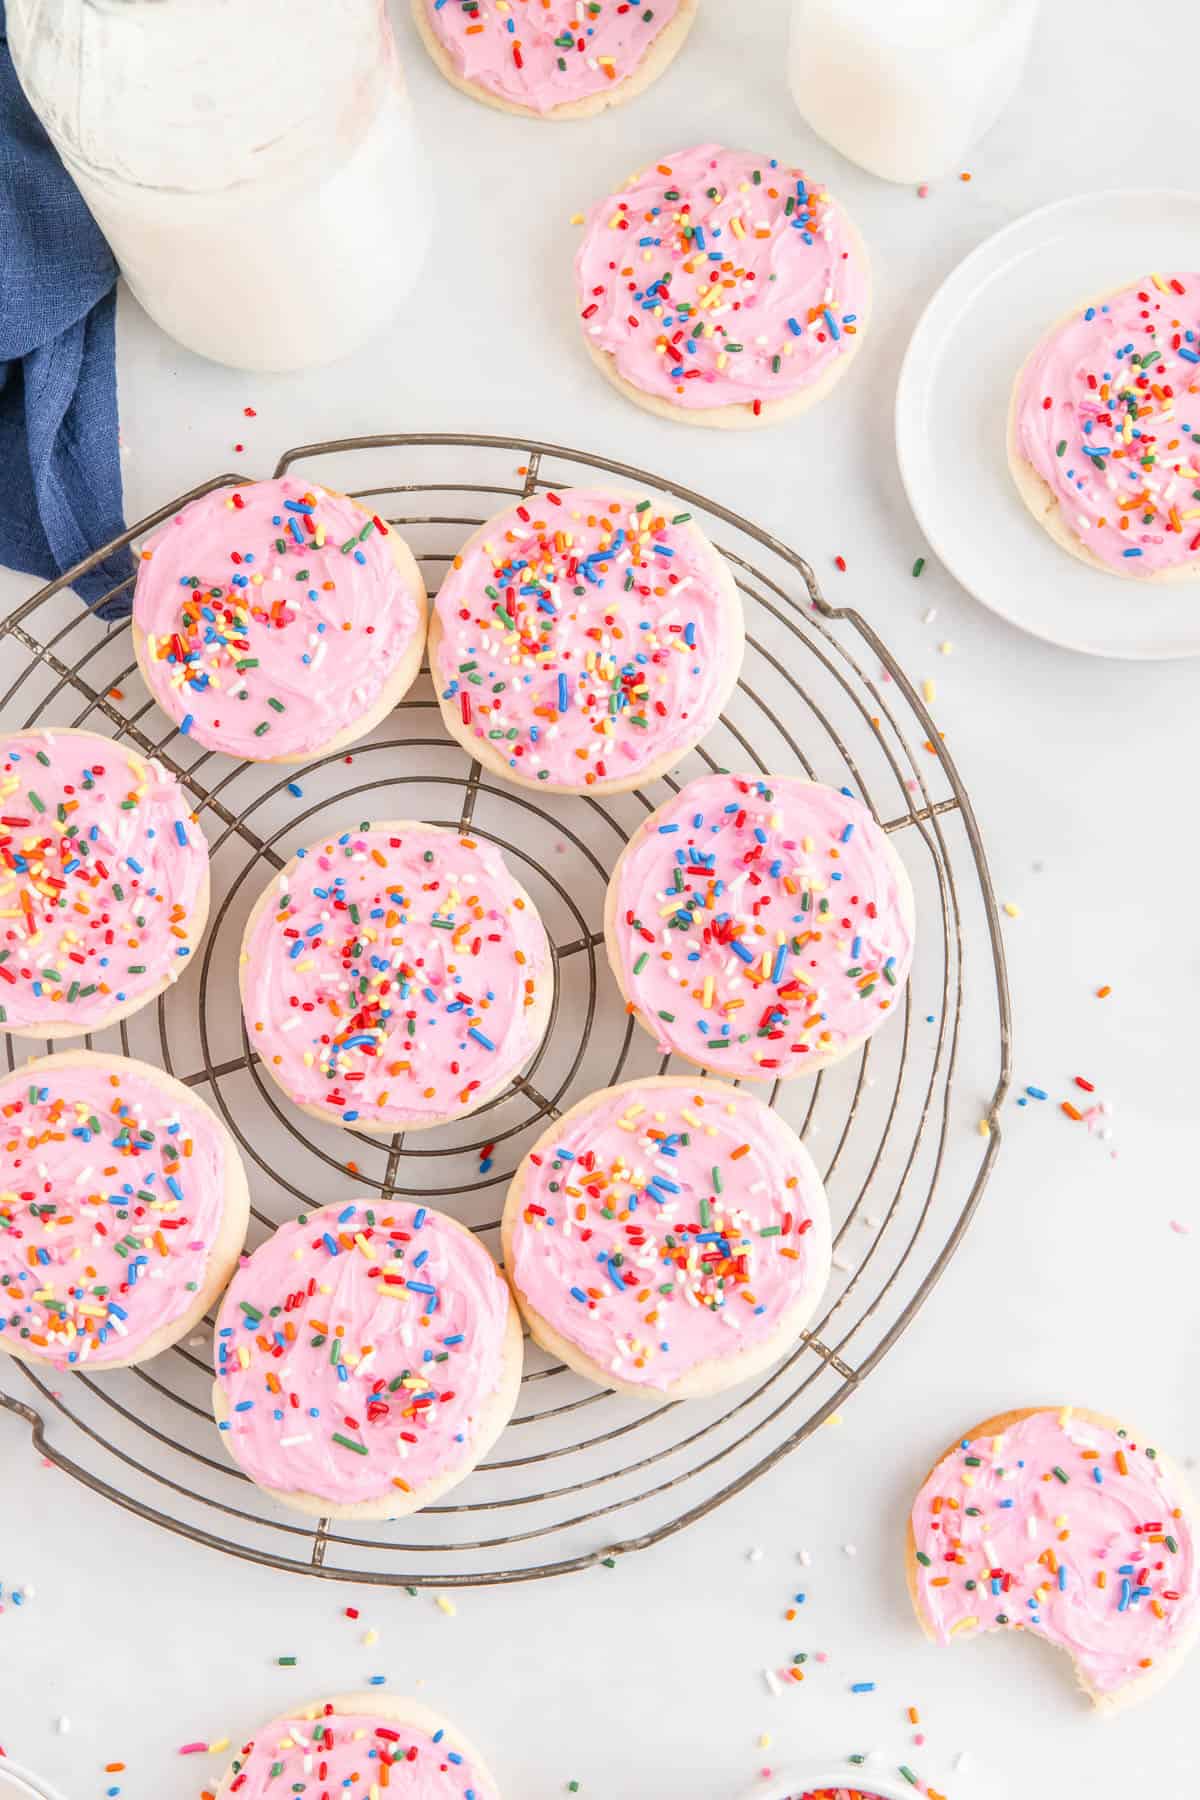 Overhead of sugar cookies with pink frosting and rainbow sprinkles on a cooling rack with more cookies and sprinkles around it.